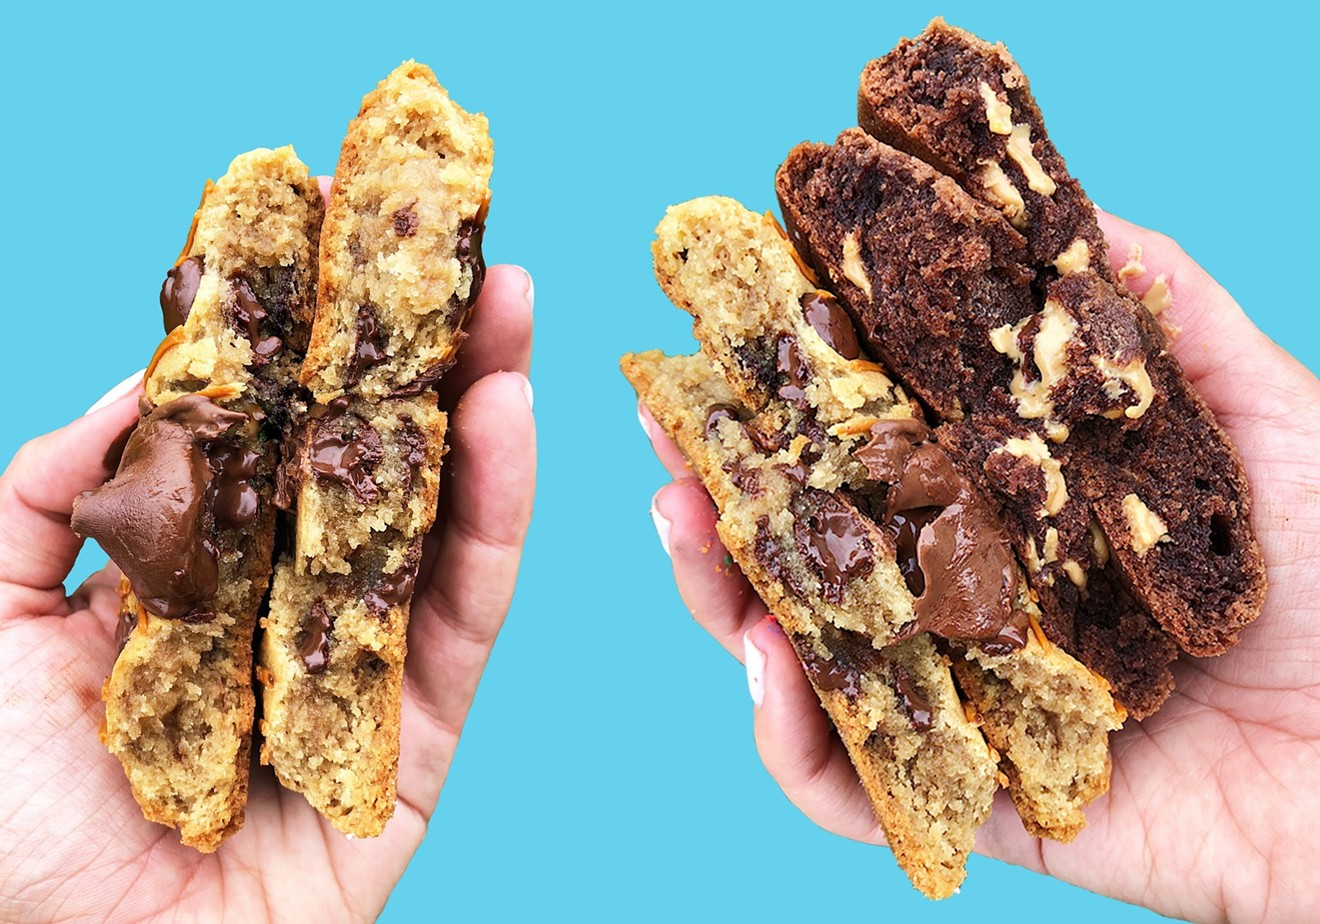 Night Owl Cookies is set to open its Wynwood flagship!